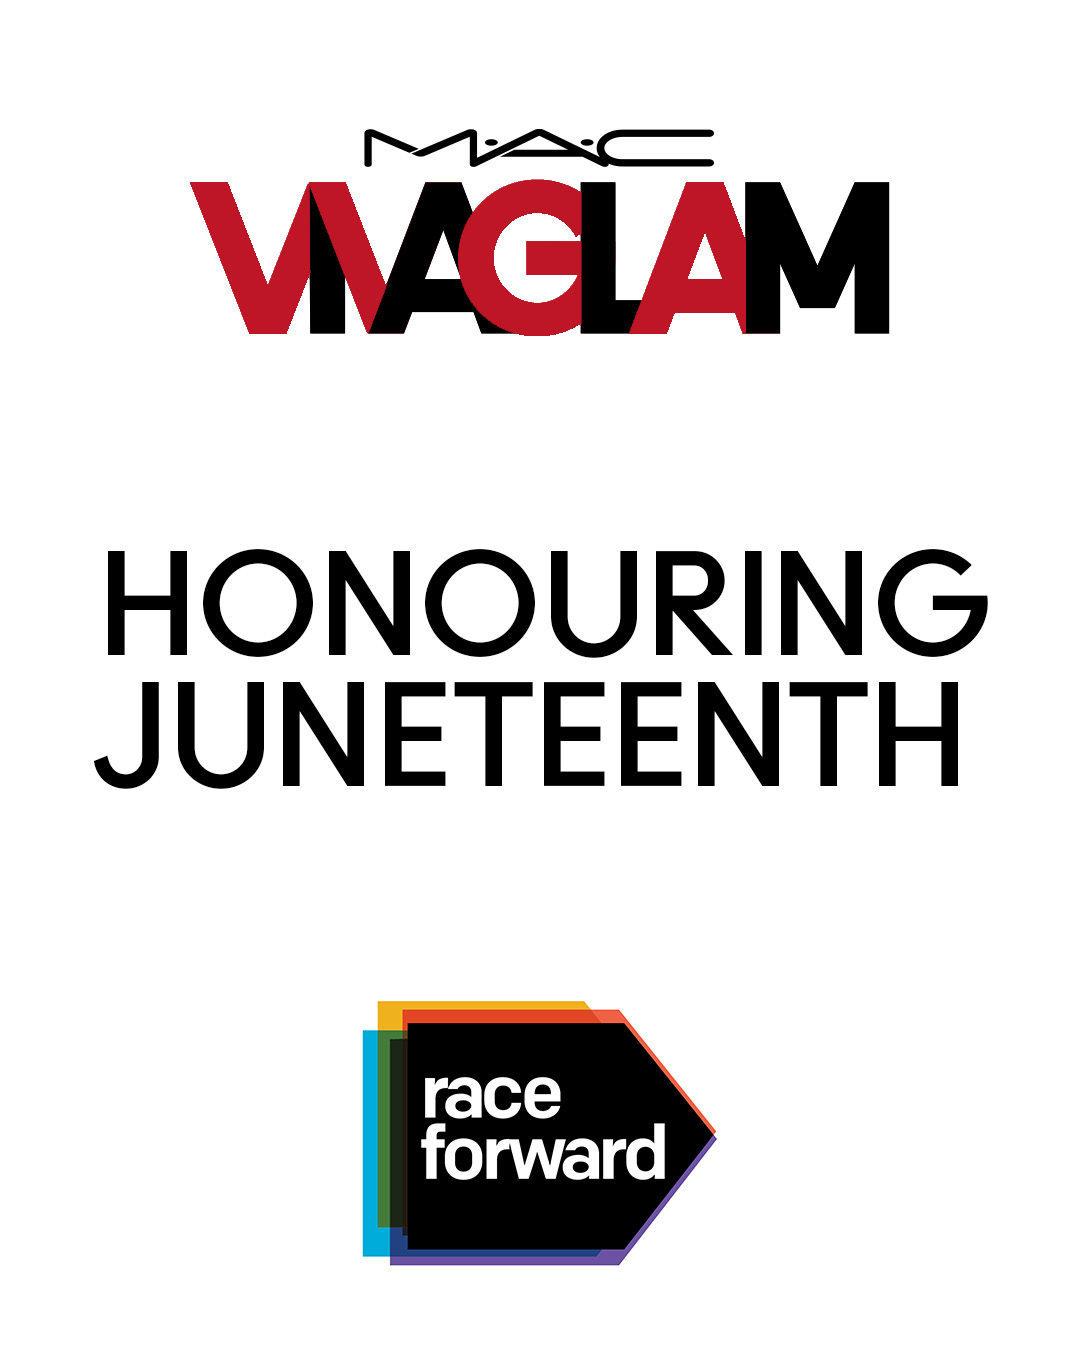 VIVIAGLAM HONOURING JUNETEENTH with race forward icon